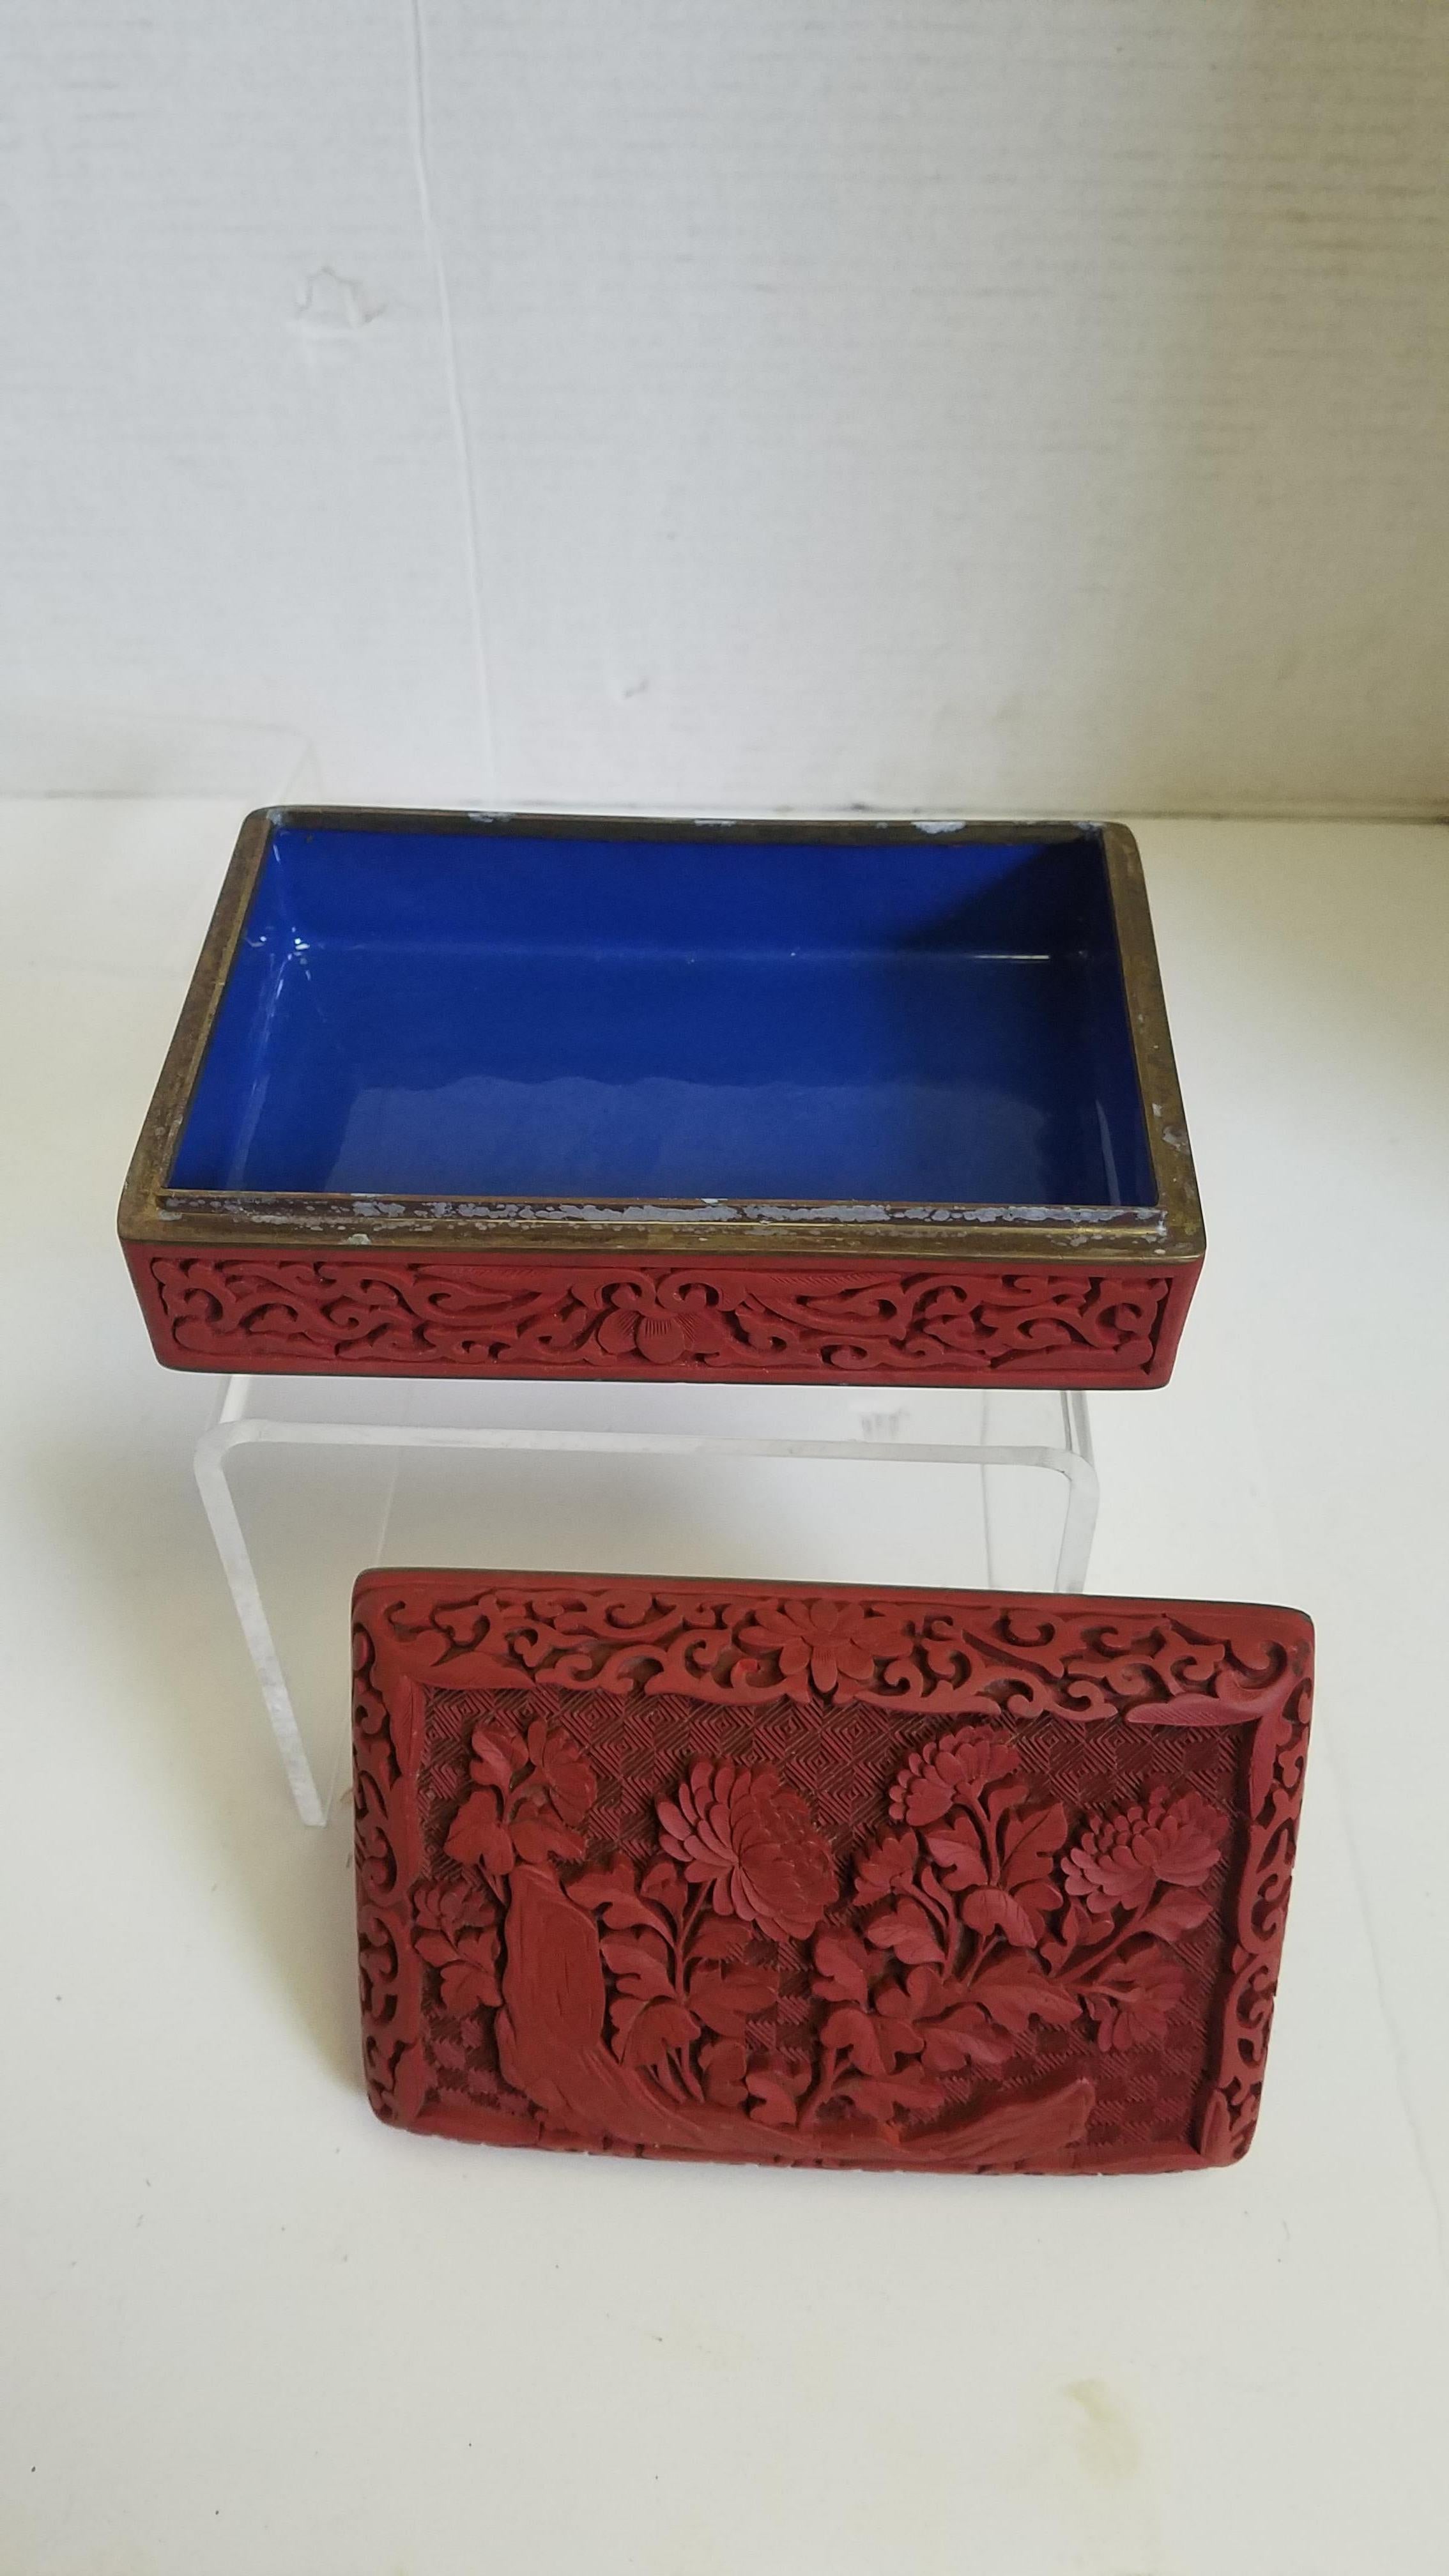 Vintage Chinese Cinnabar box. The foundation of the box is brass and the inside in enameled in a rich blue. The detail of the cinnabar can be see on every surface of the outside, even the bottom. Beautiful floral with relief carving, please see all